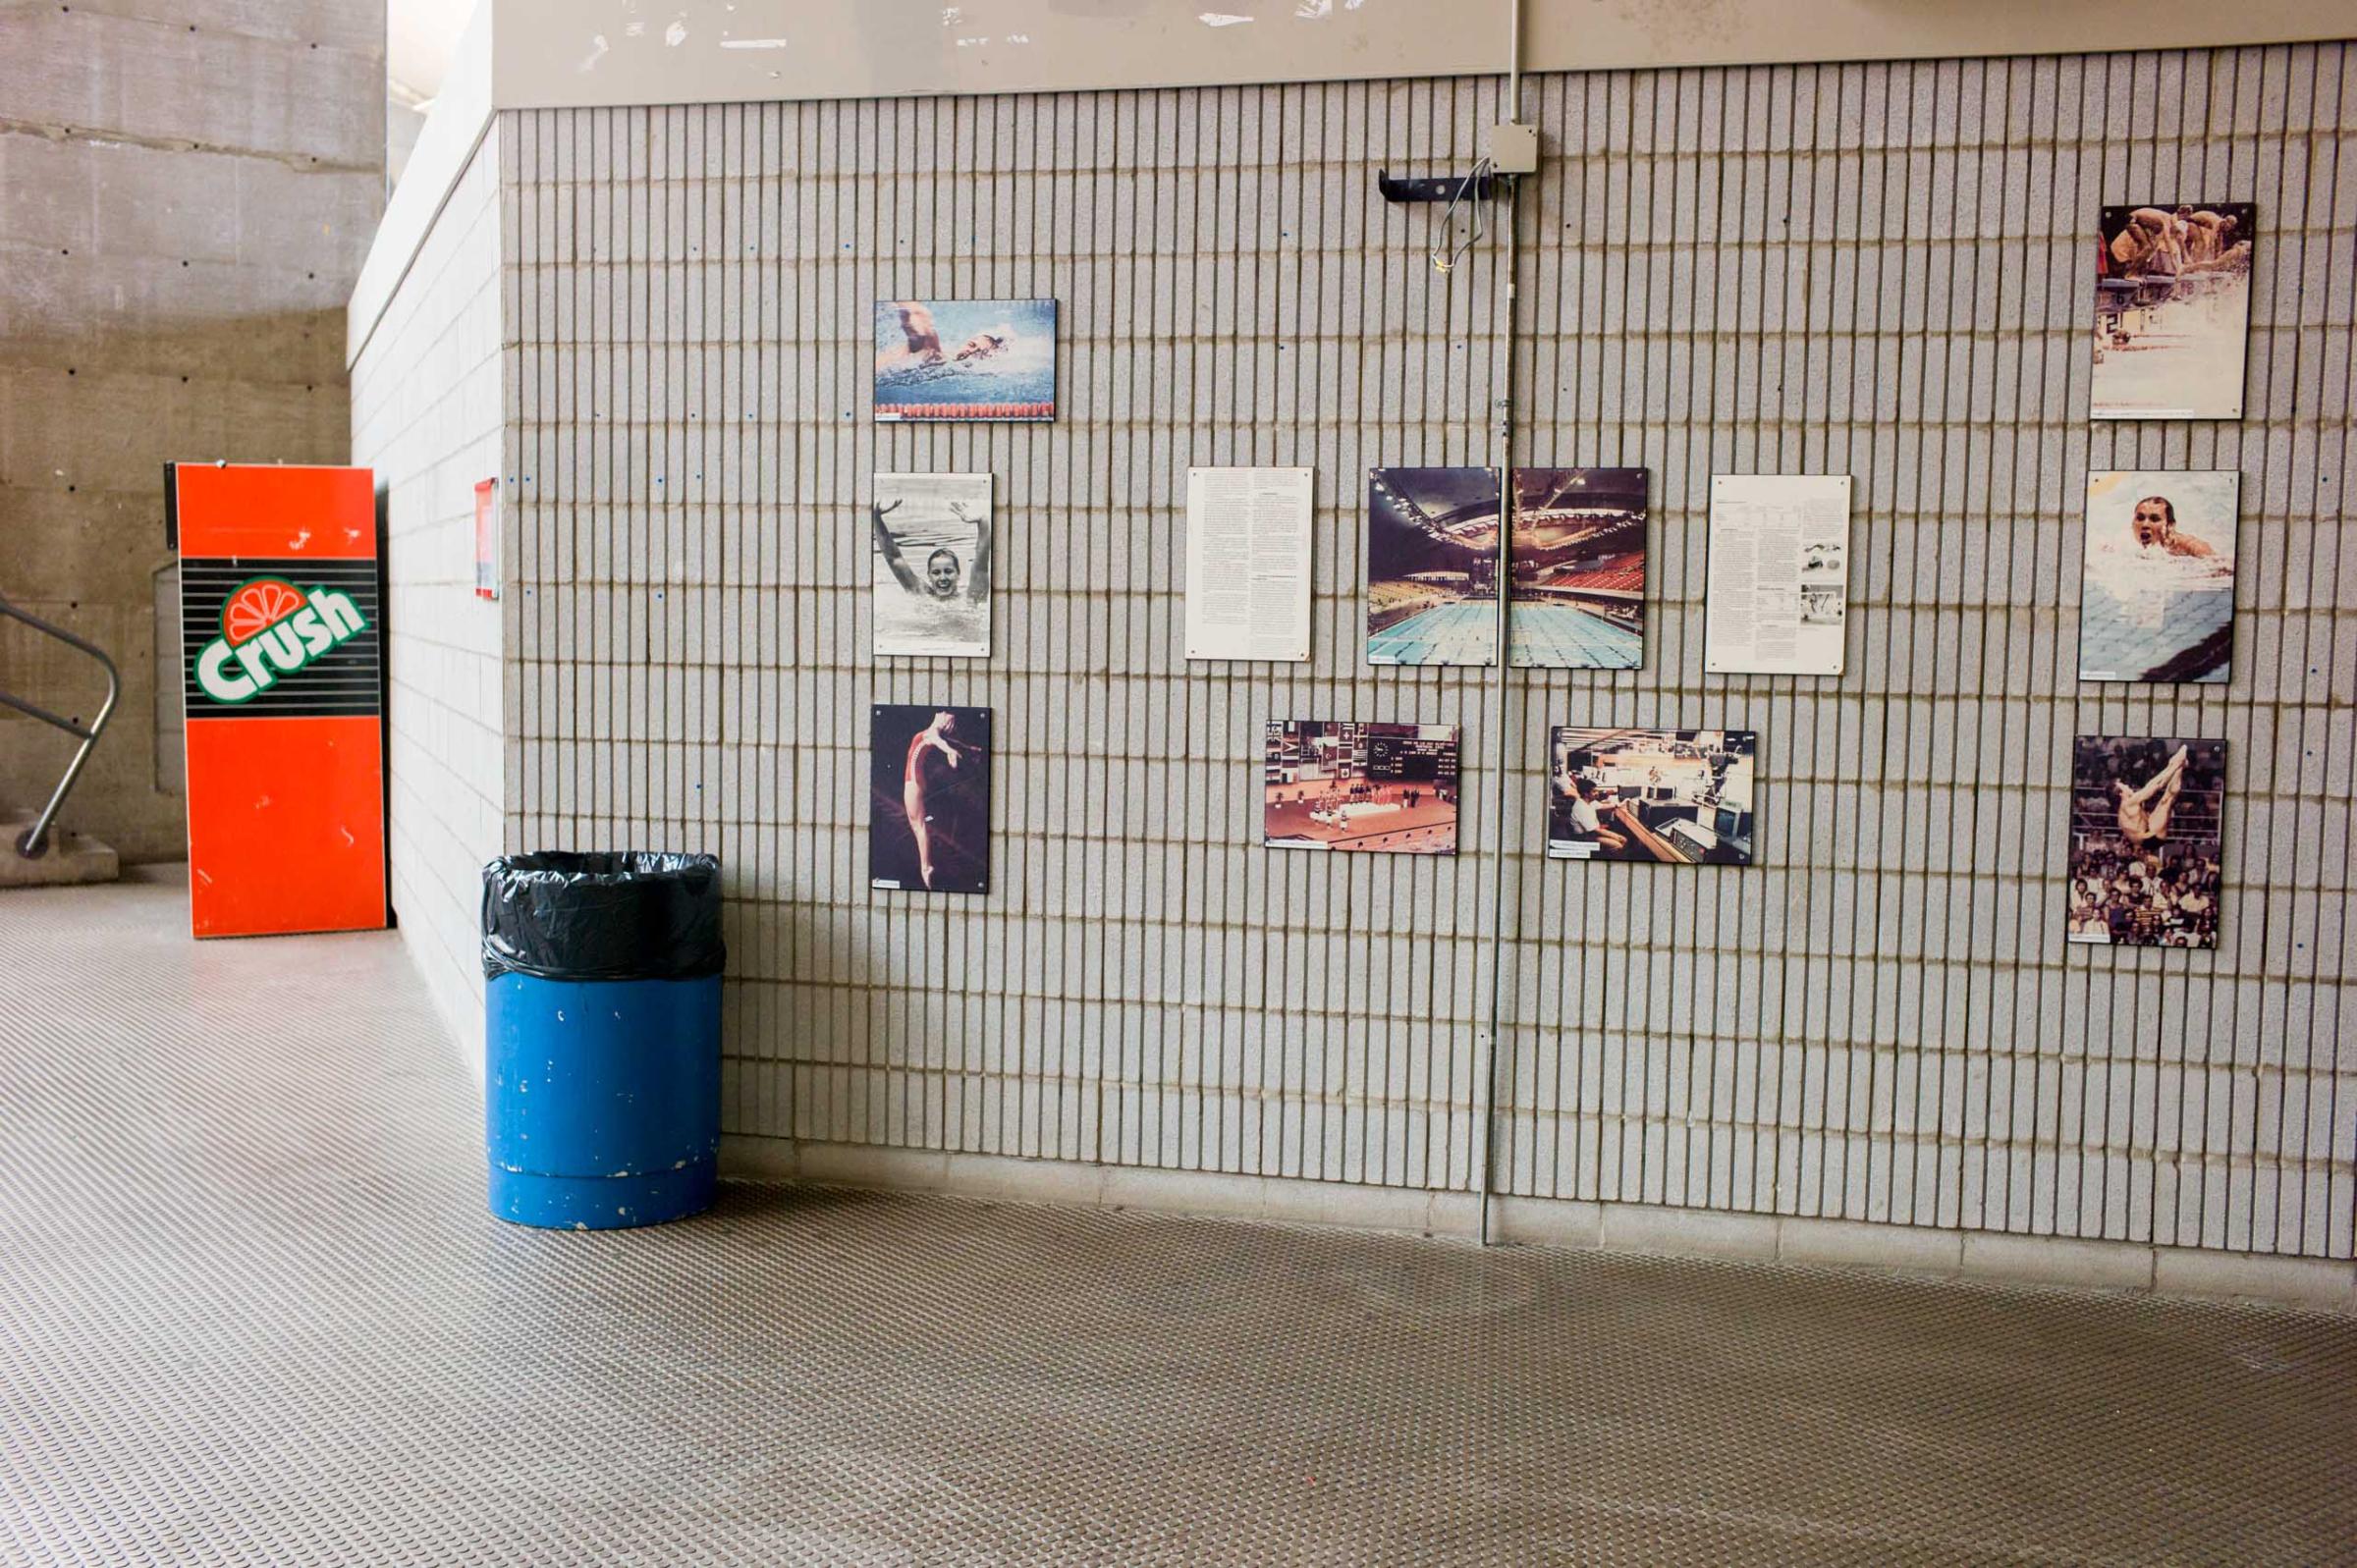 Pictures hang on the wall of the aquatics center in Montreal, host of the 1976 Summer Olympics, photographed in November 2008.